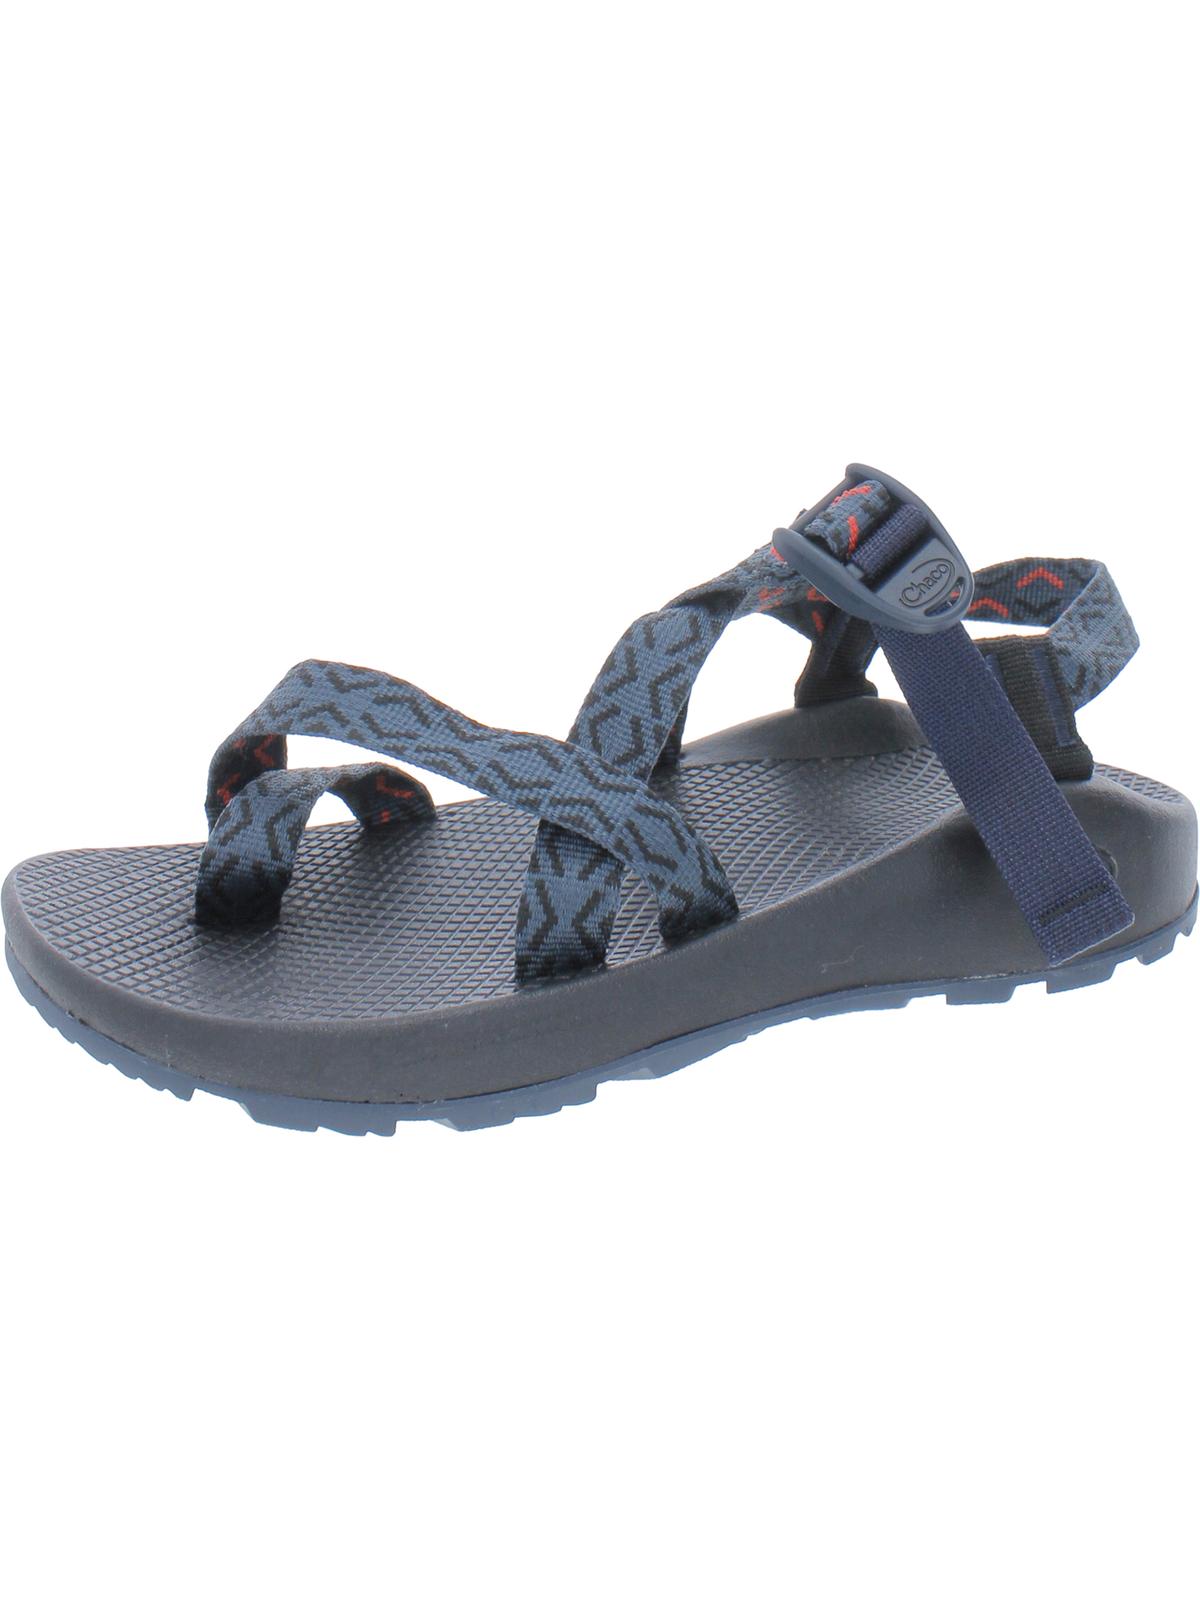 CHACO Z2 CLASSIC Mens Open Toe Ankle Strap Sport Sandals